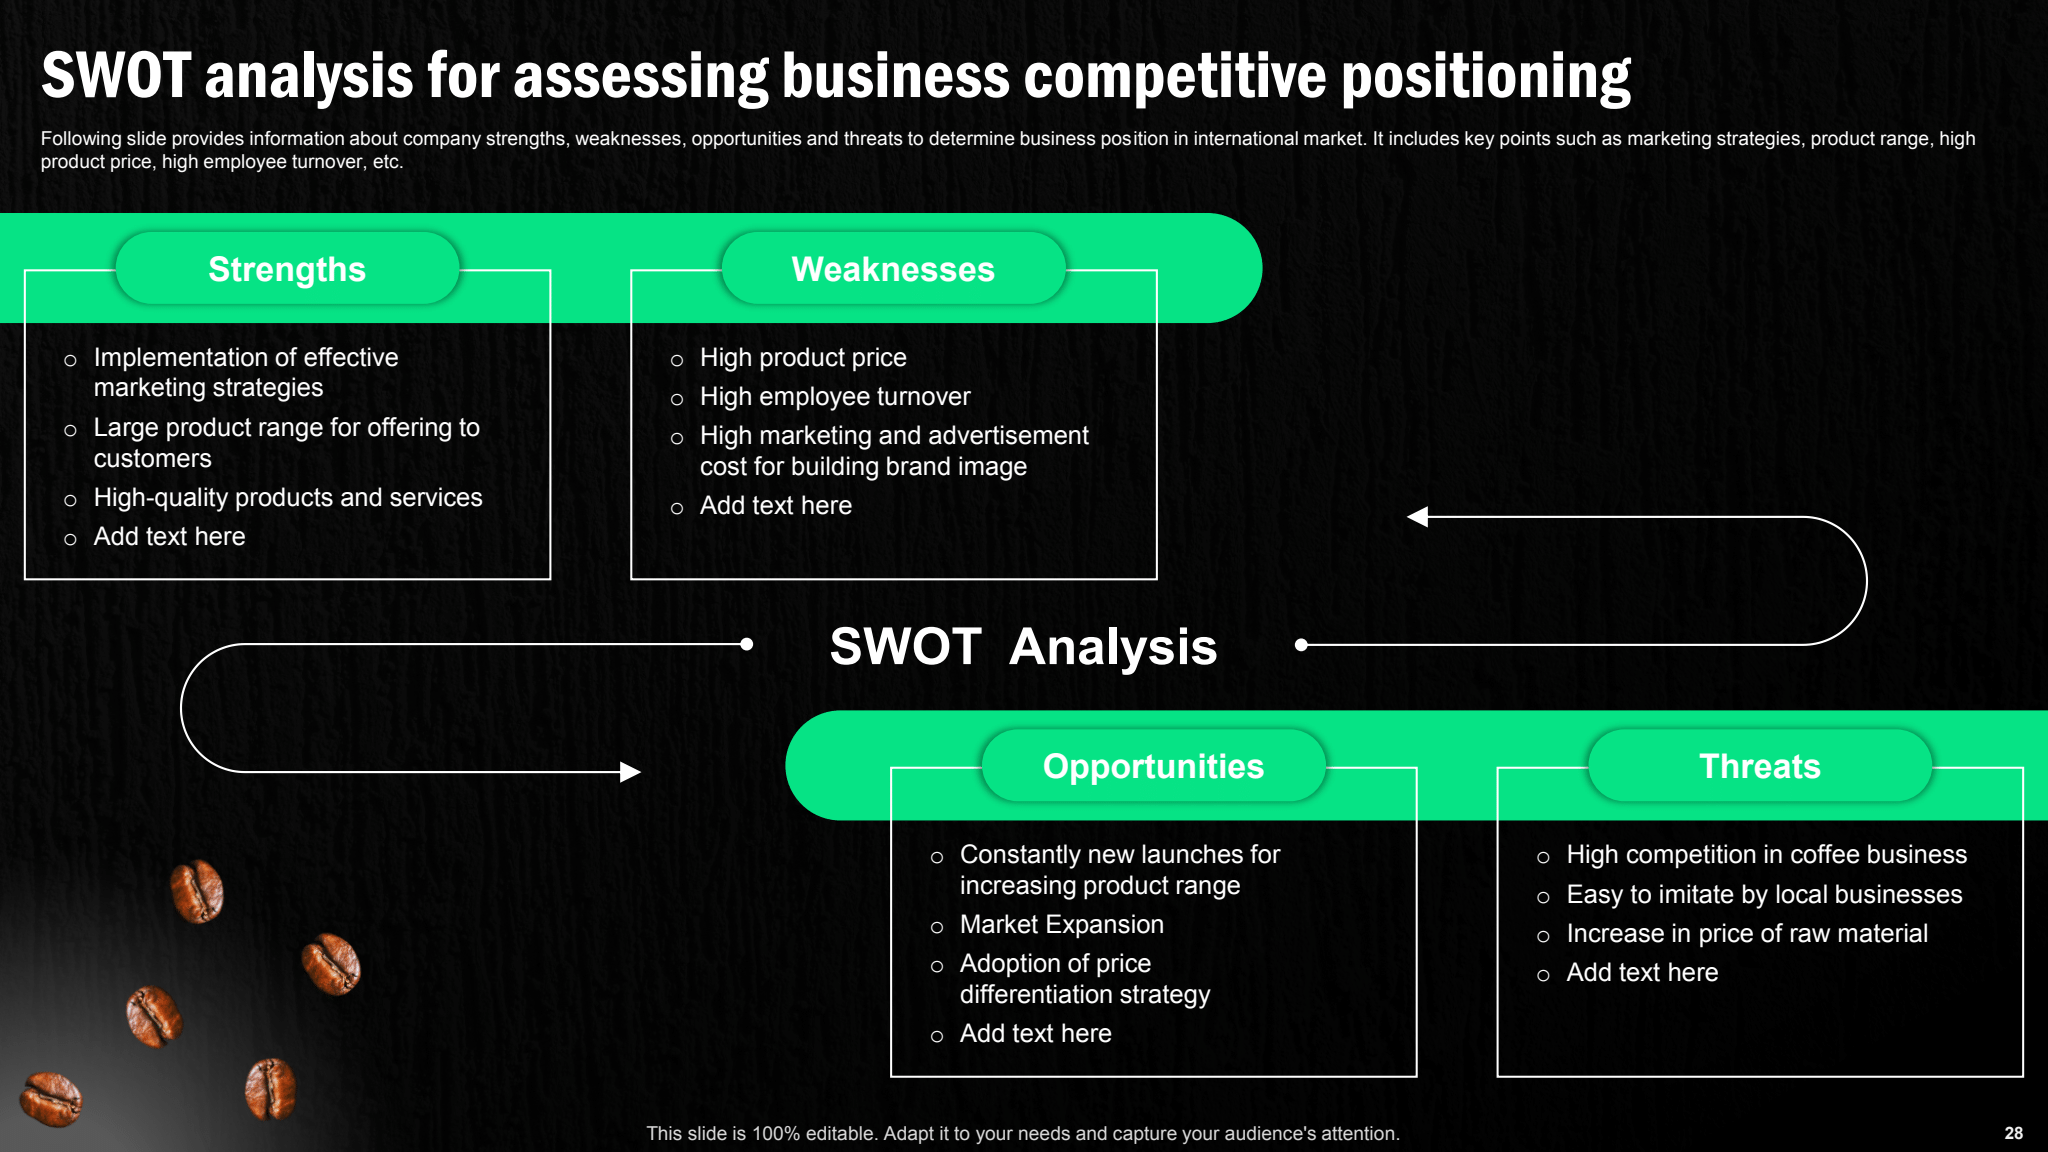 SWOT analysis for assessing business competitive positioning